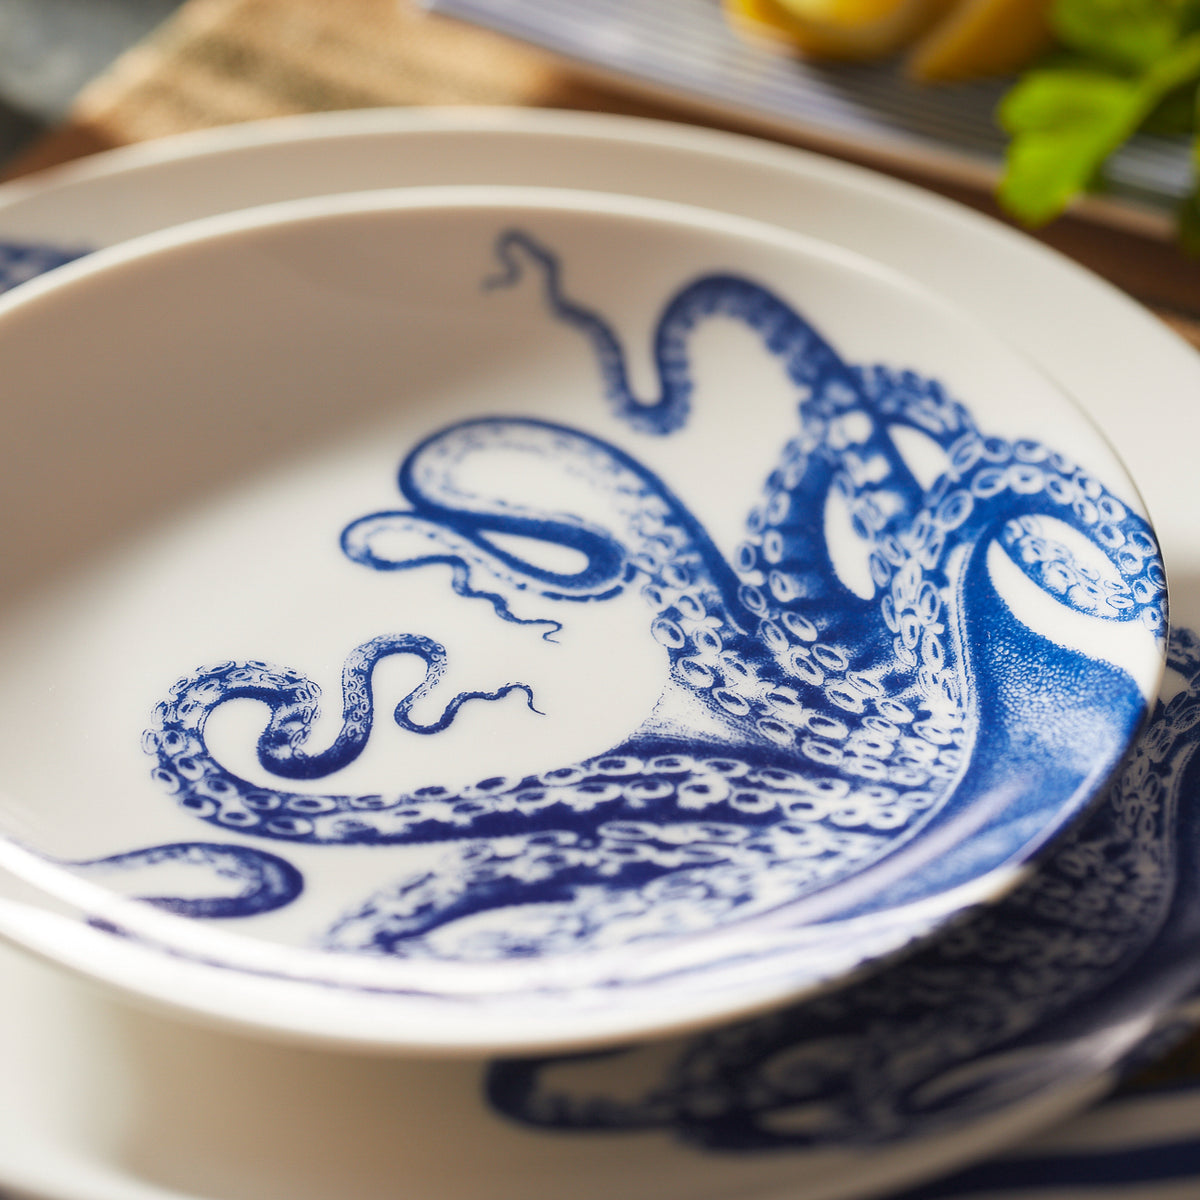 A vibrant and playful Lucy Coupe Salad Plate Blue with striking blue and white colors displayed elegantly on a table, proudly made by Caskata Artisanal Home.